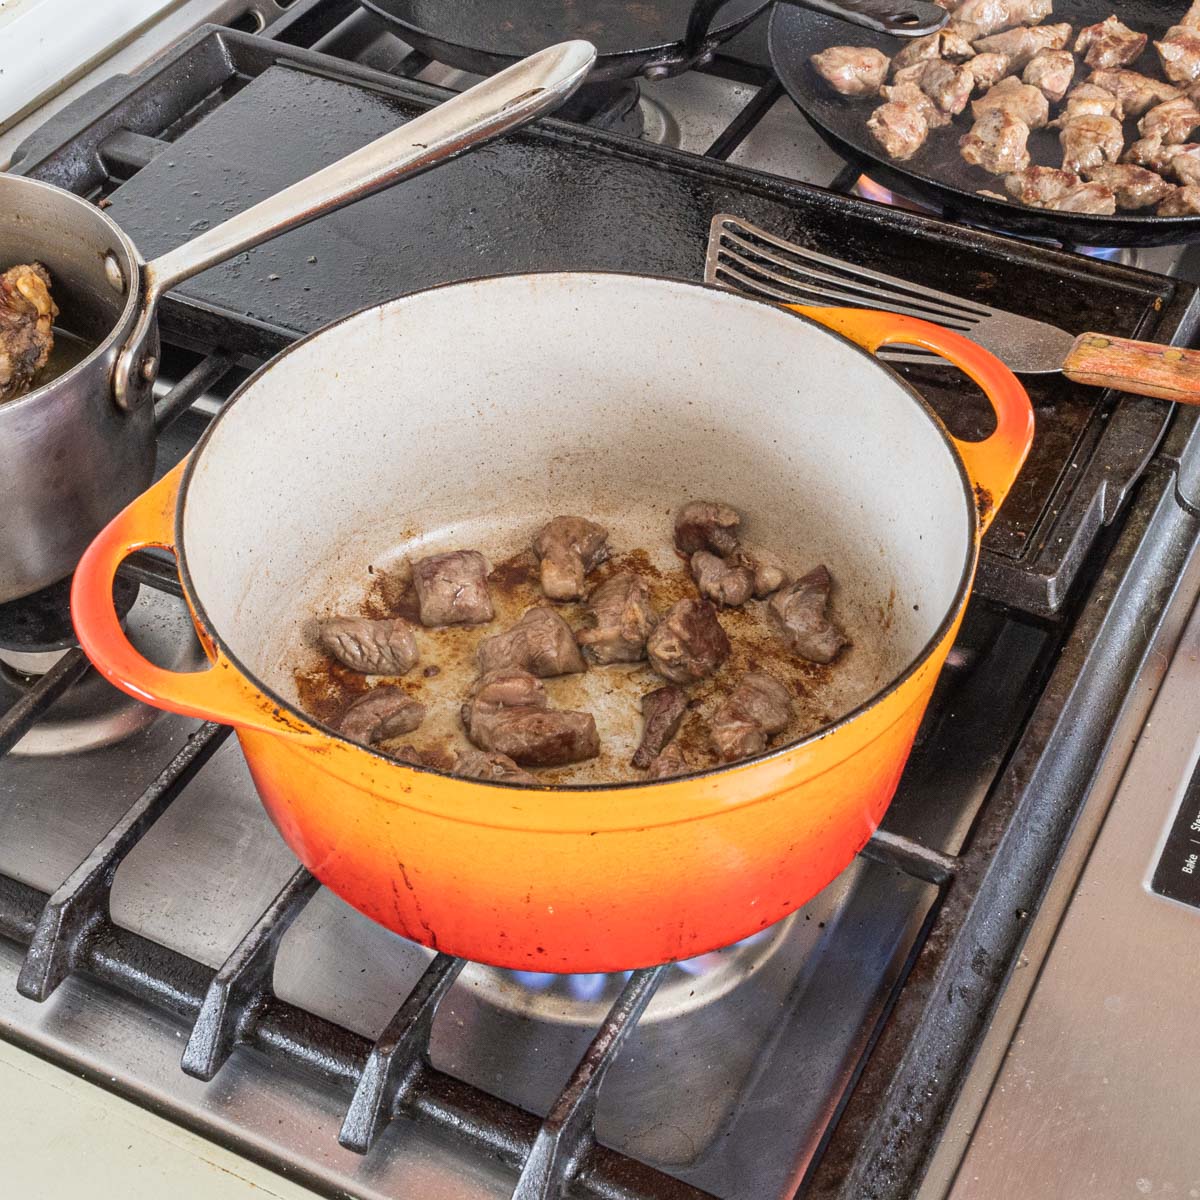 Browning lamb meat stew pieces in an orange enameled cast iron dutch oven on a burner.